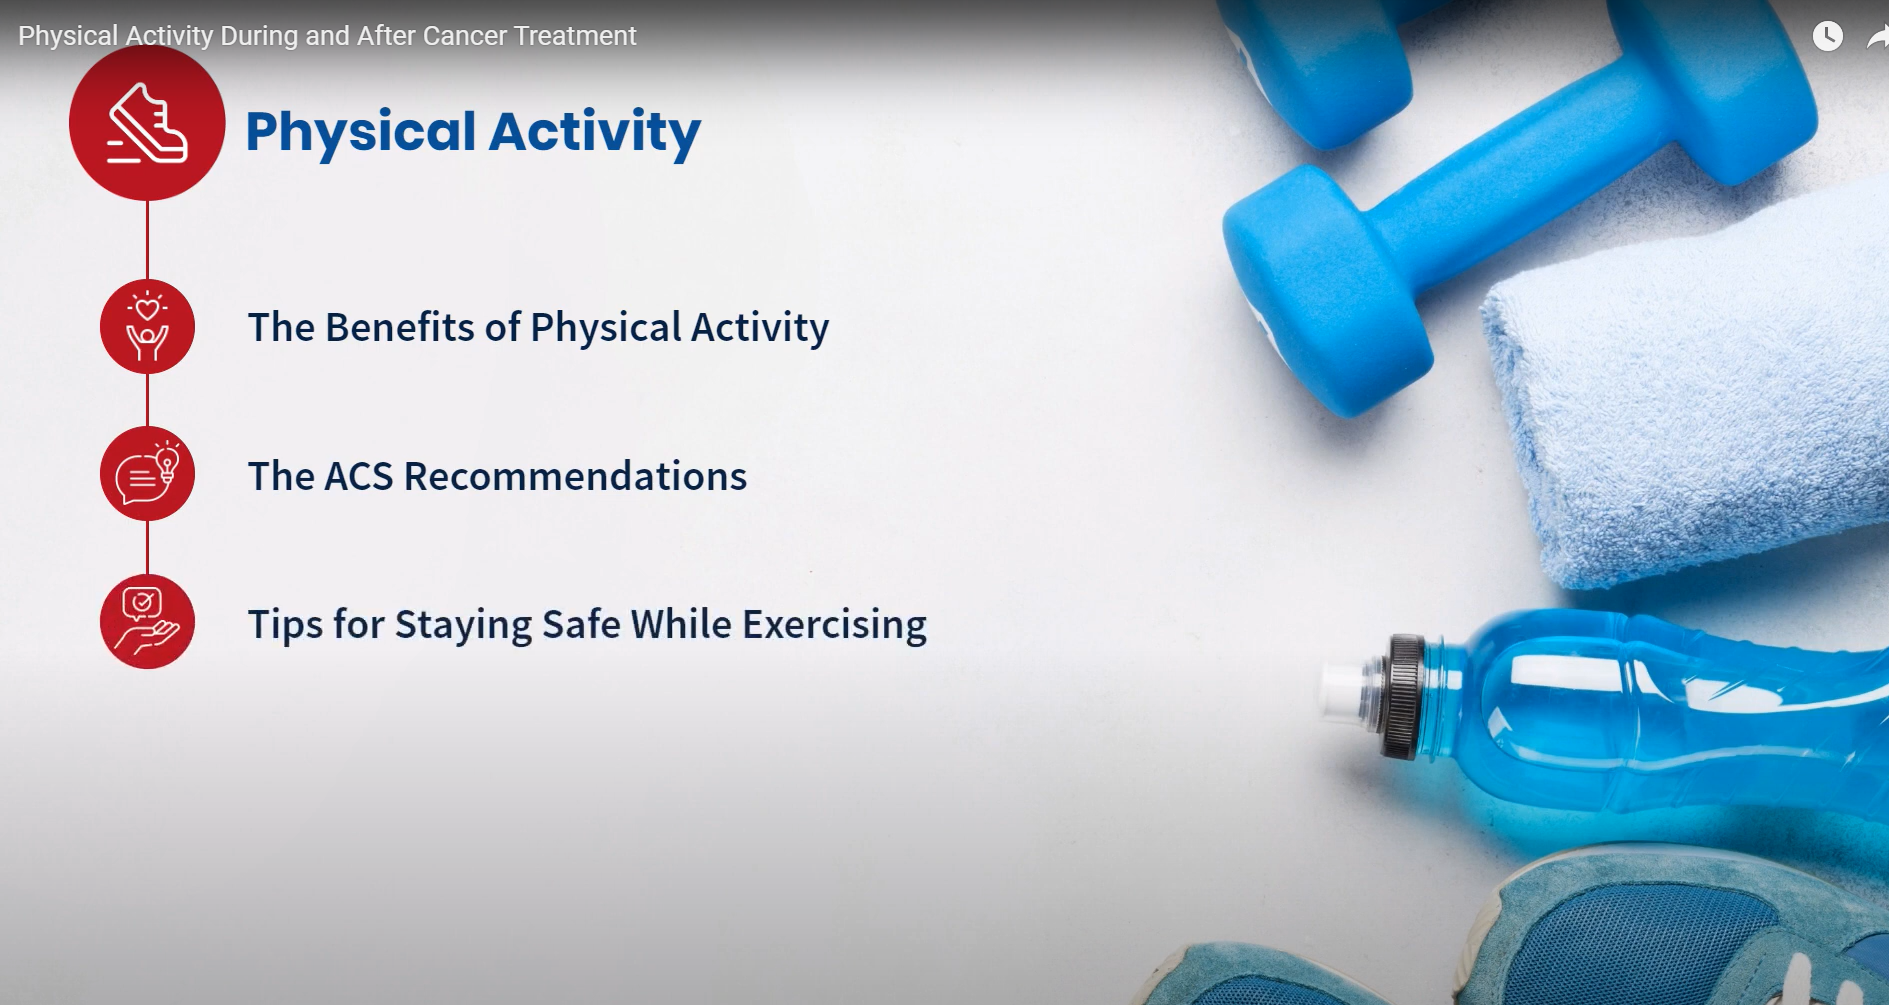 hand weights, towel, water bottle, and tennis shoes illustrating key concepts: the benefits of physical activity, the ACS recommendations, and tips for staying safe while exercising.